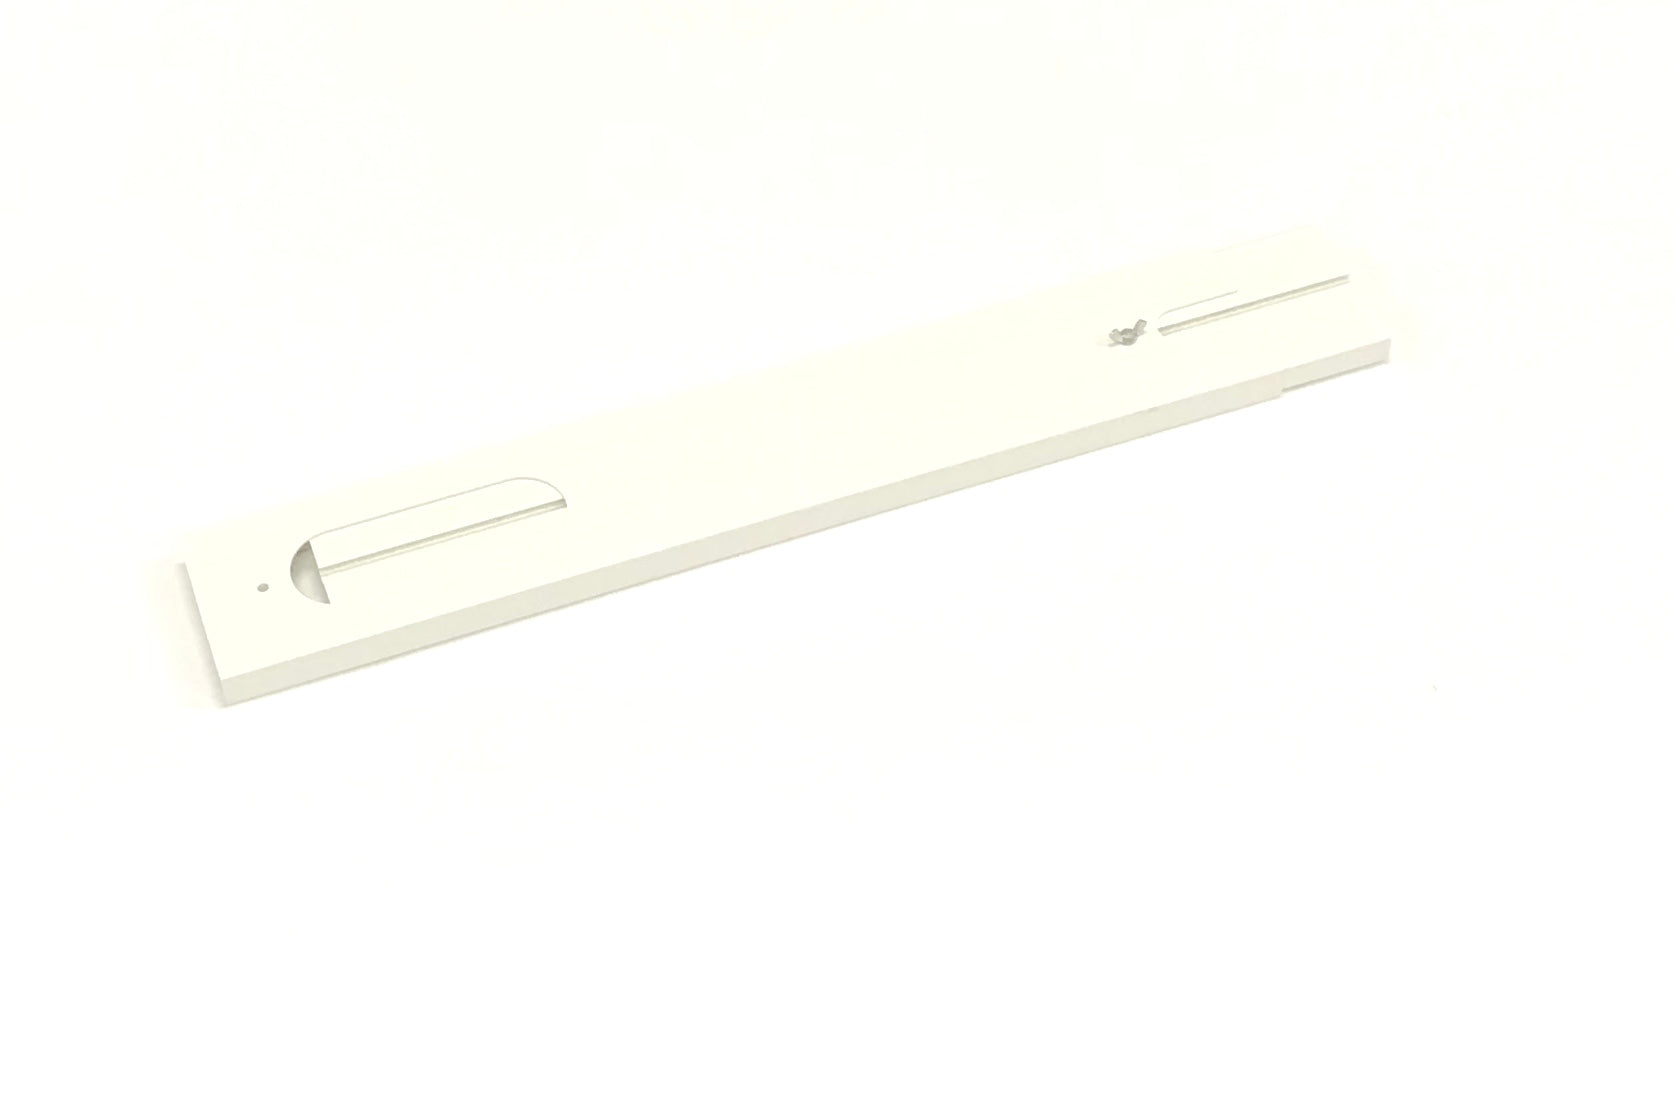 OEM Delonghi Air Conditioner AC Window Slider Originally Shipped With PAC10, PAC75U, PAC166